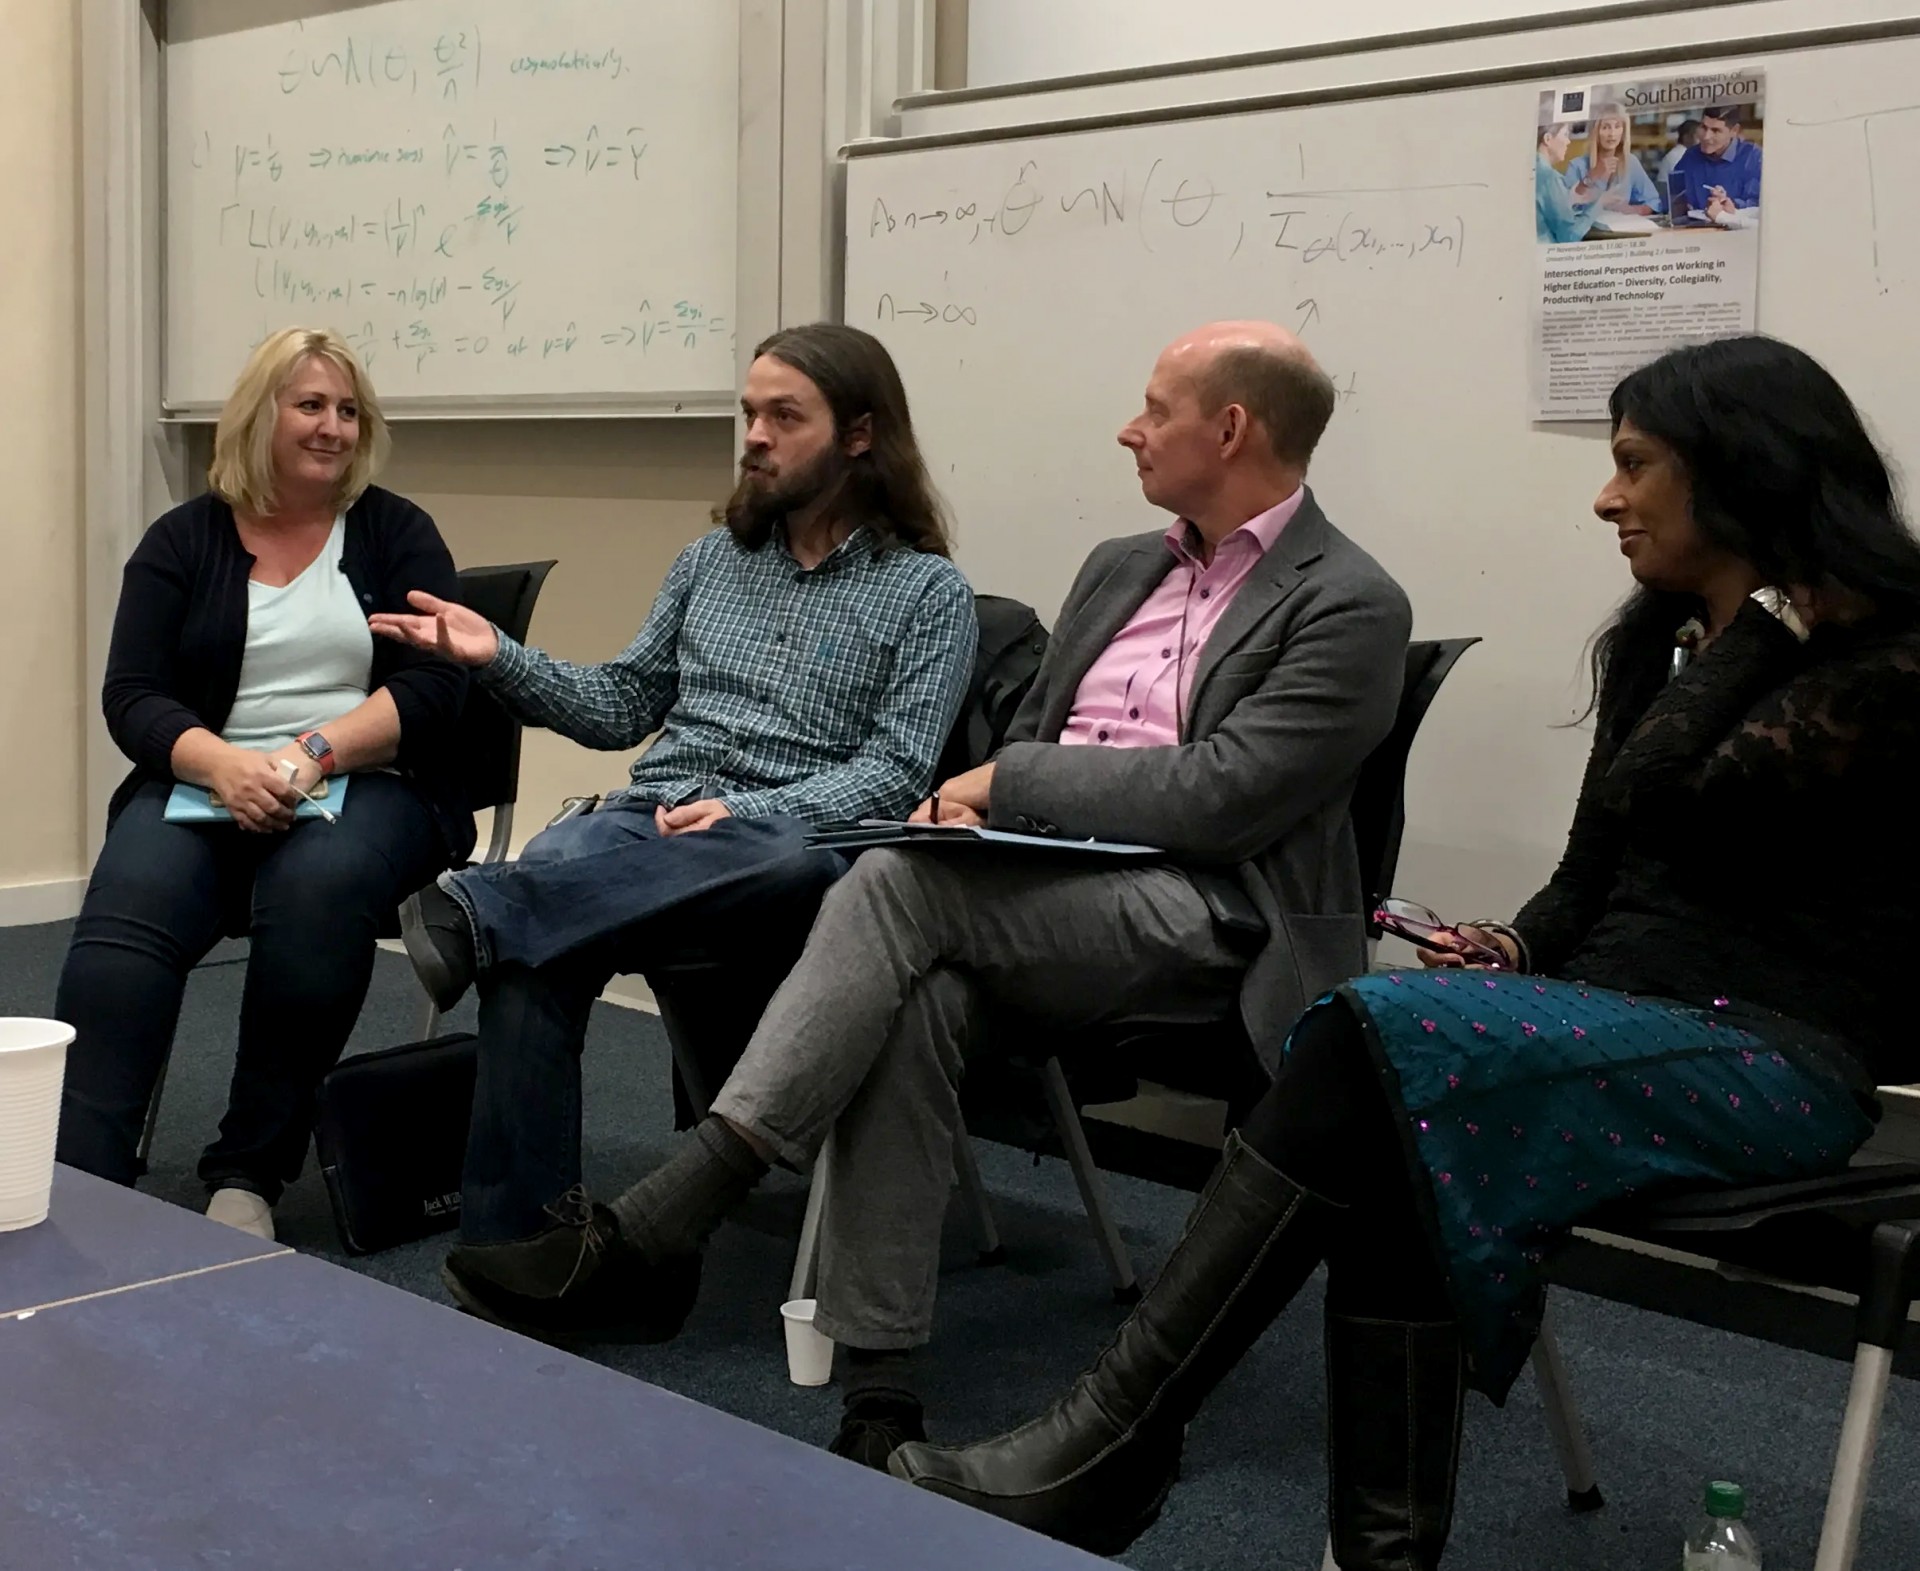 From left to right: Fiona Harvey, Eric Silverman, Bruce Macfarlane, Kalwant Bhopal